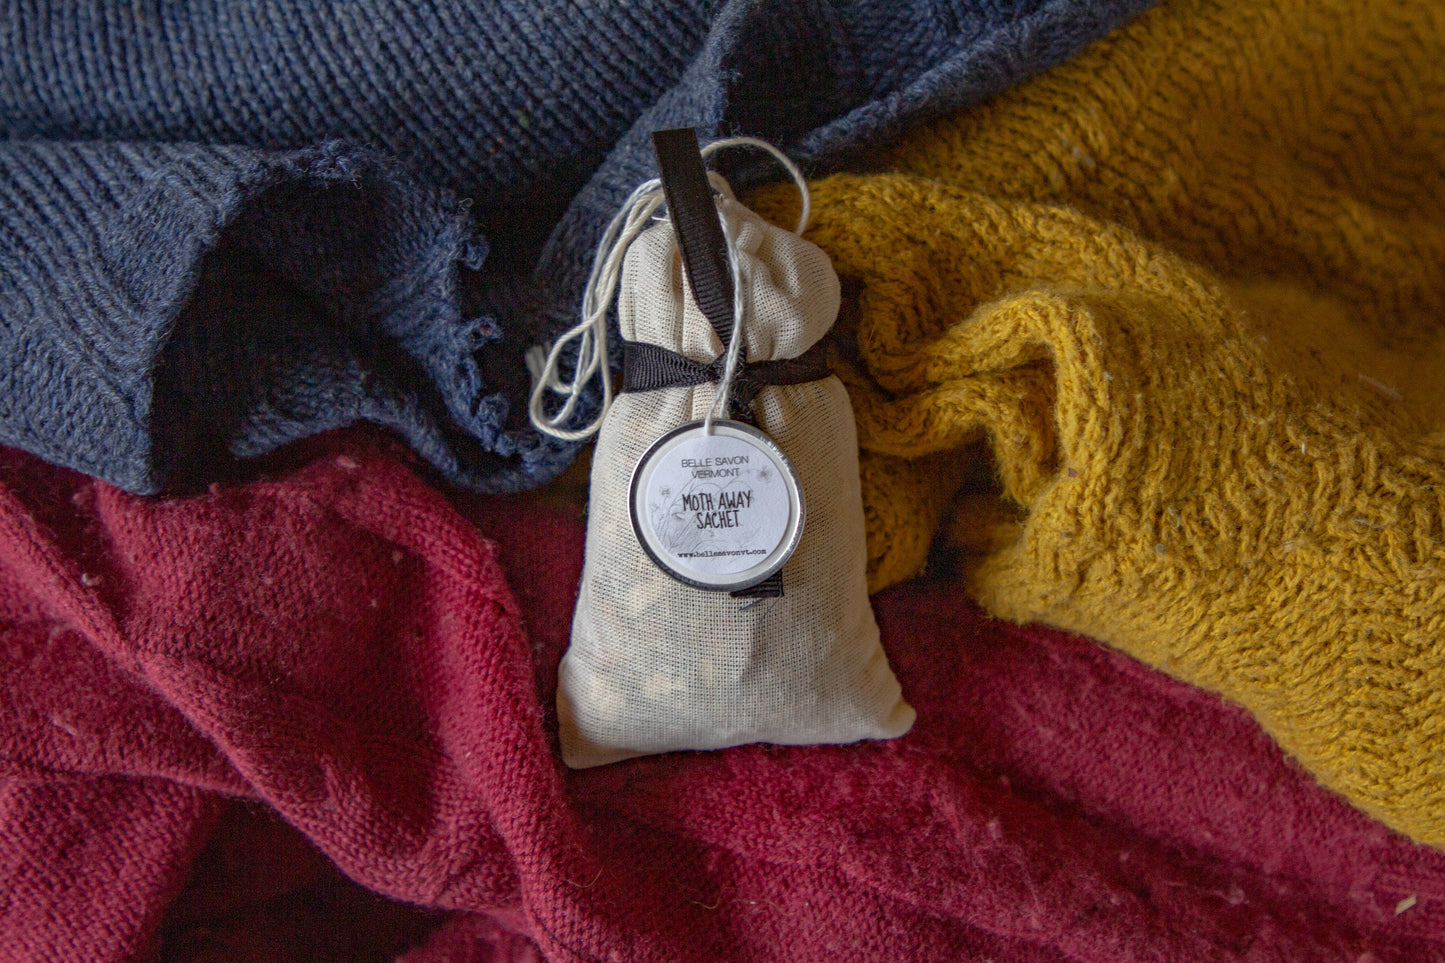 Moth Away Sachets Filled with Natural and Organic Herbs and Spices-Single Sachet-Favors-Gifts-Home Care